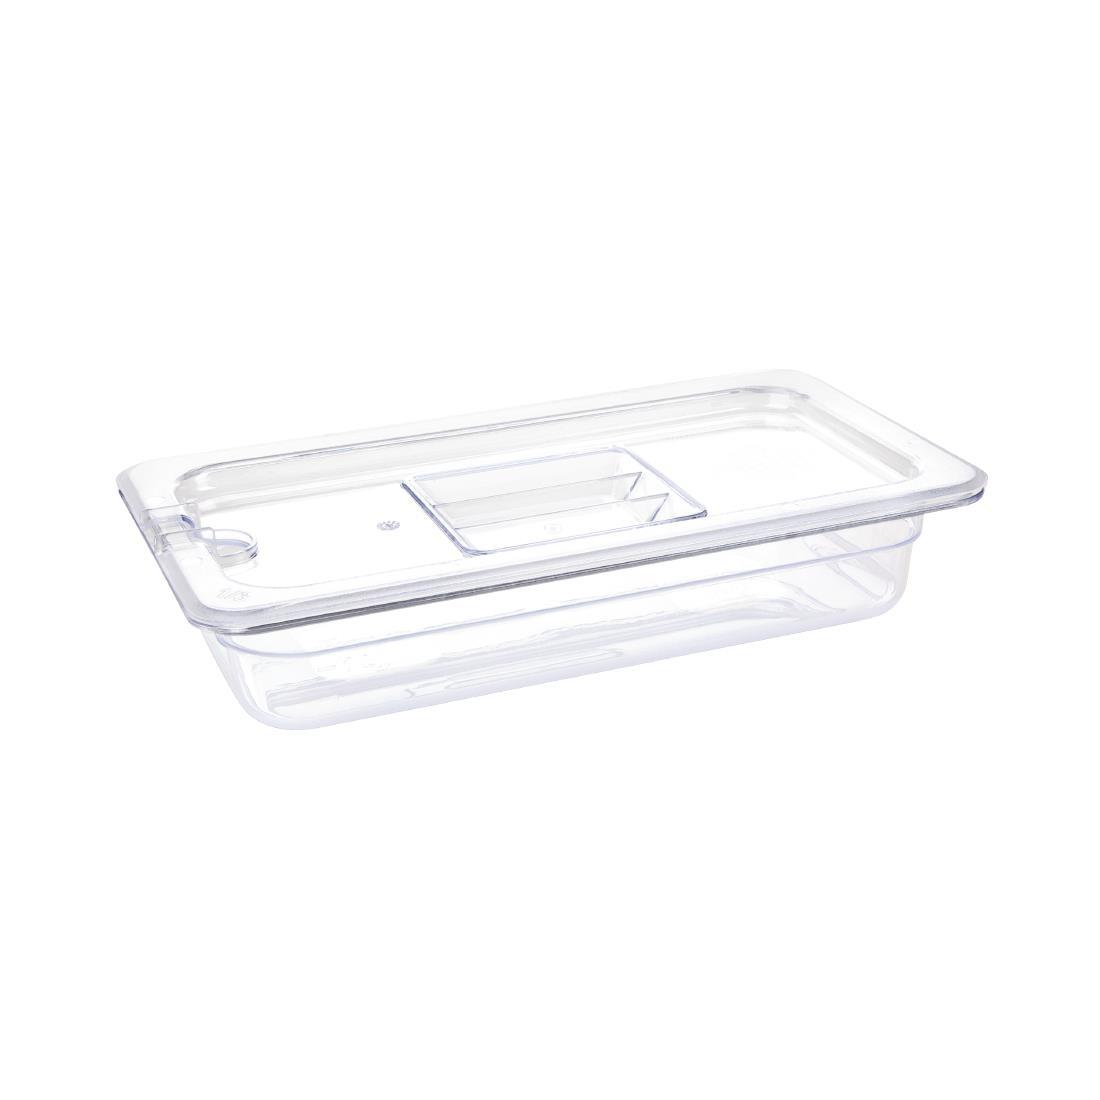 Vogue Polycarbonate 1/3 Gastronorm Container 65mm Clear - U232  - 3